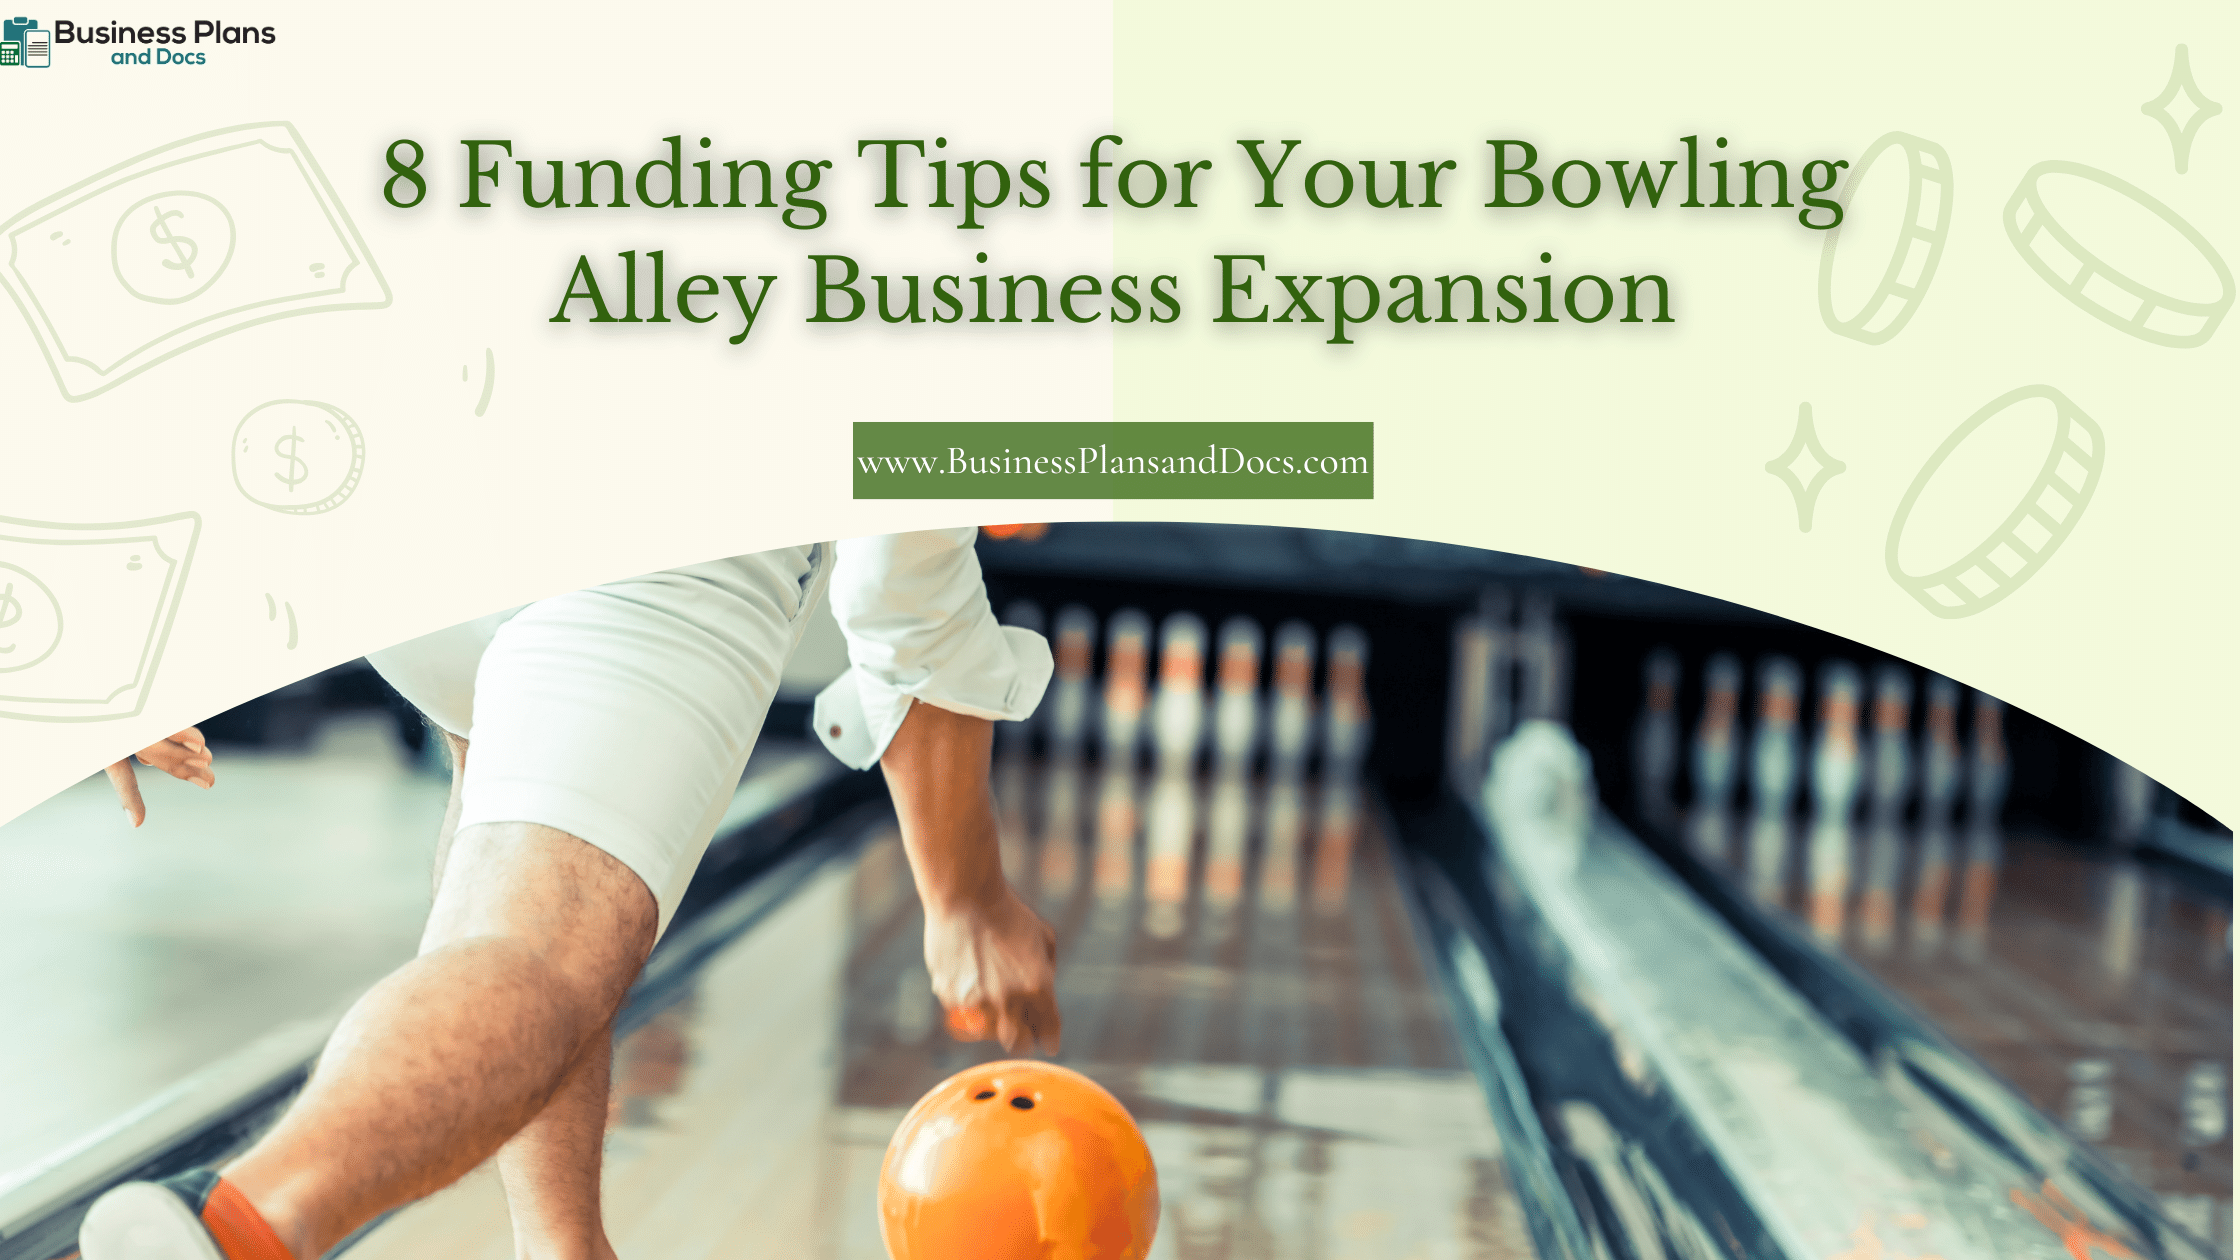 8 Funding Tips for Your Bowling Alley Business Expansion